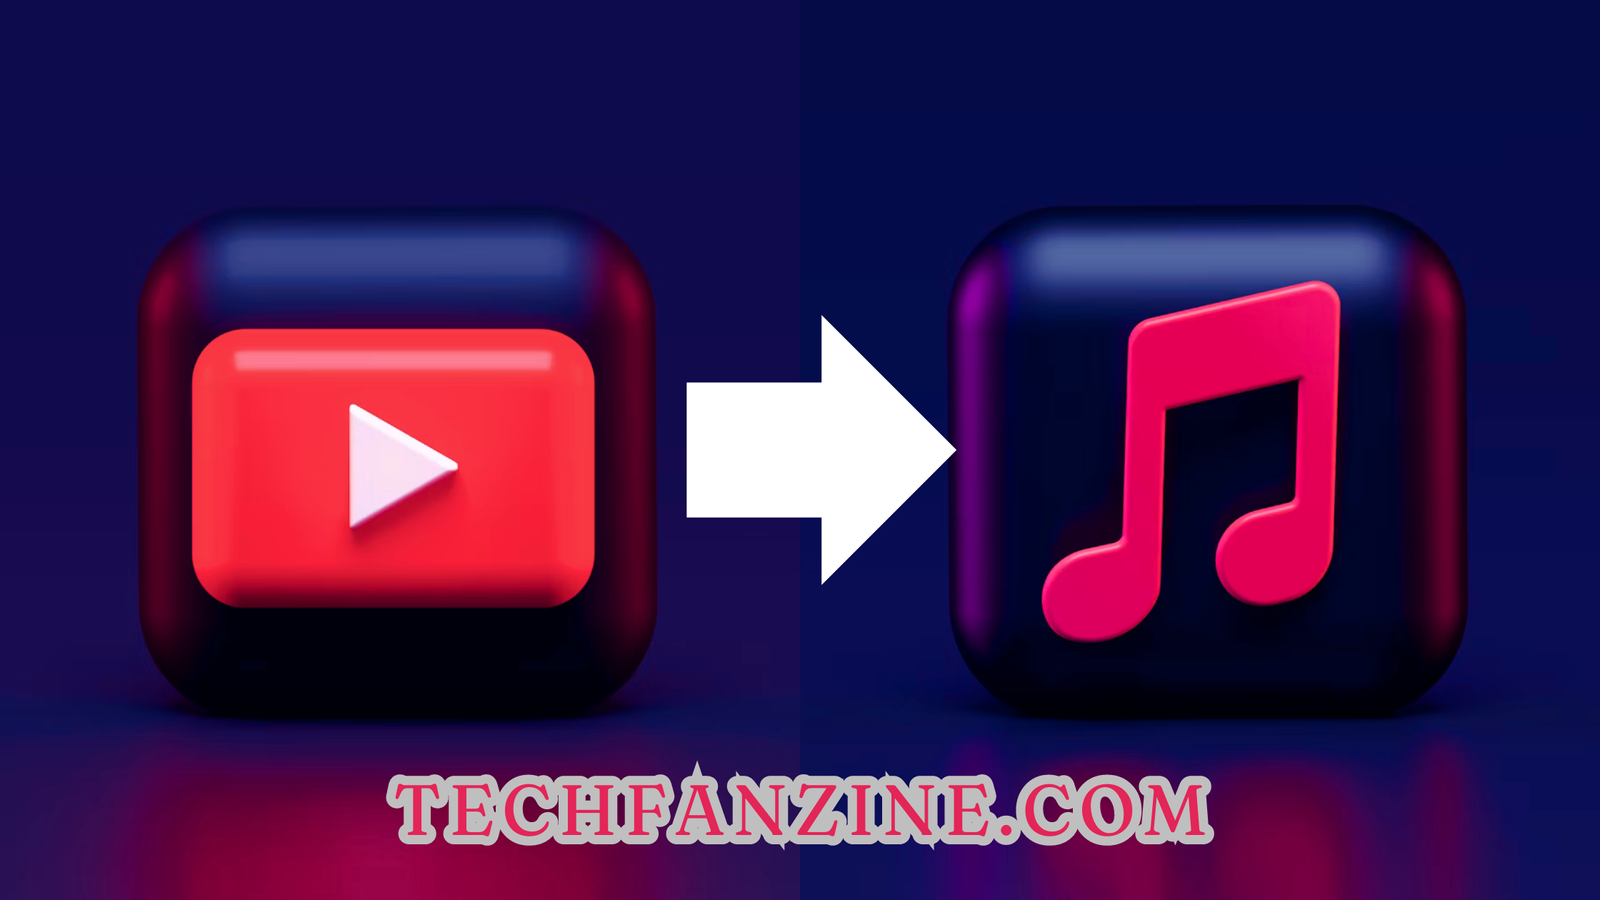 youtube to mp3